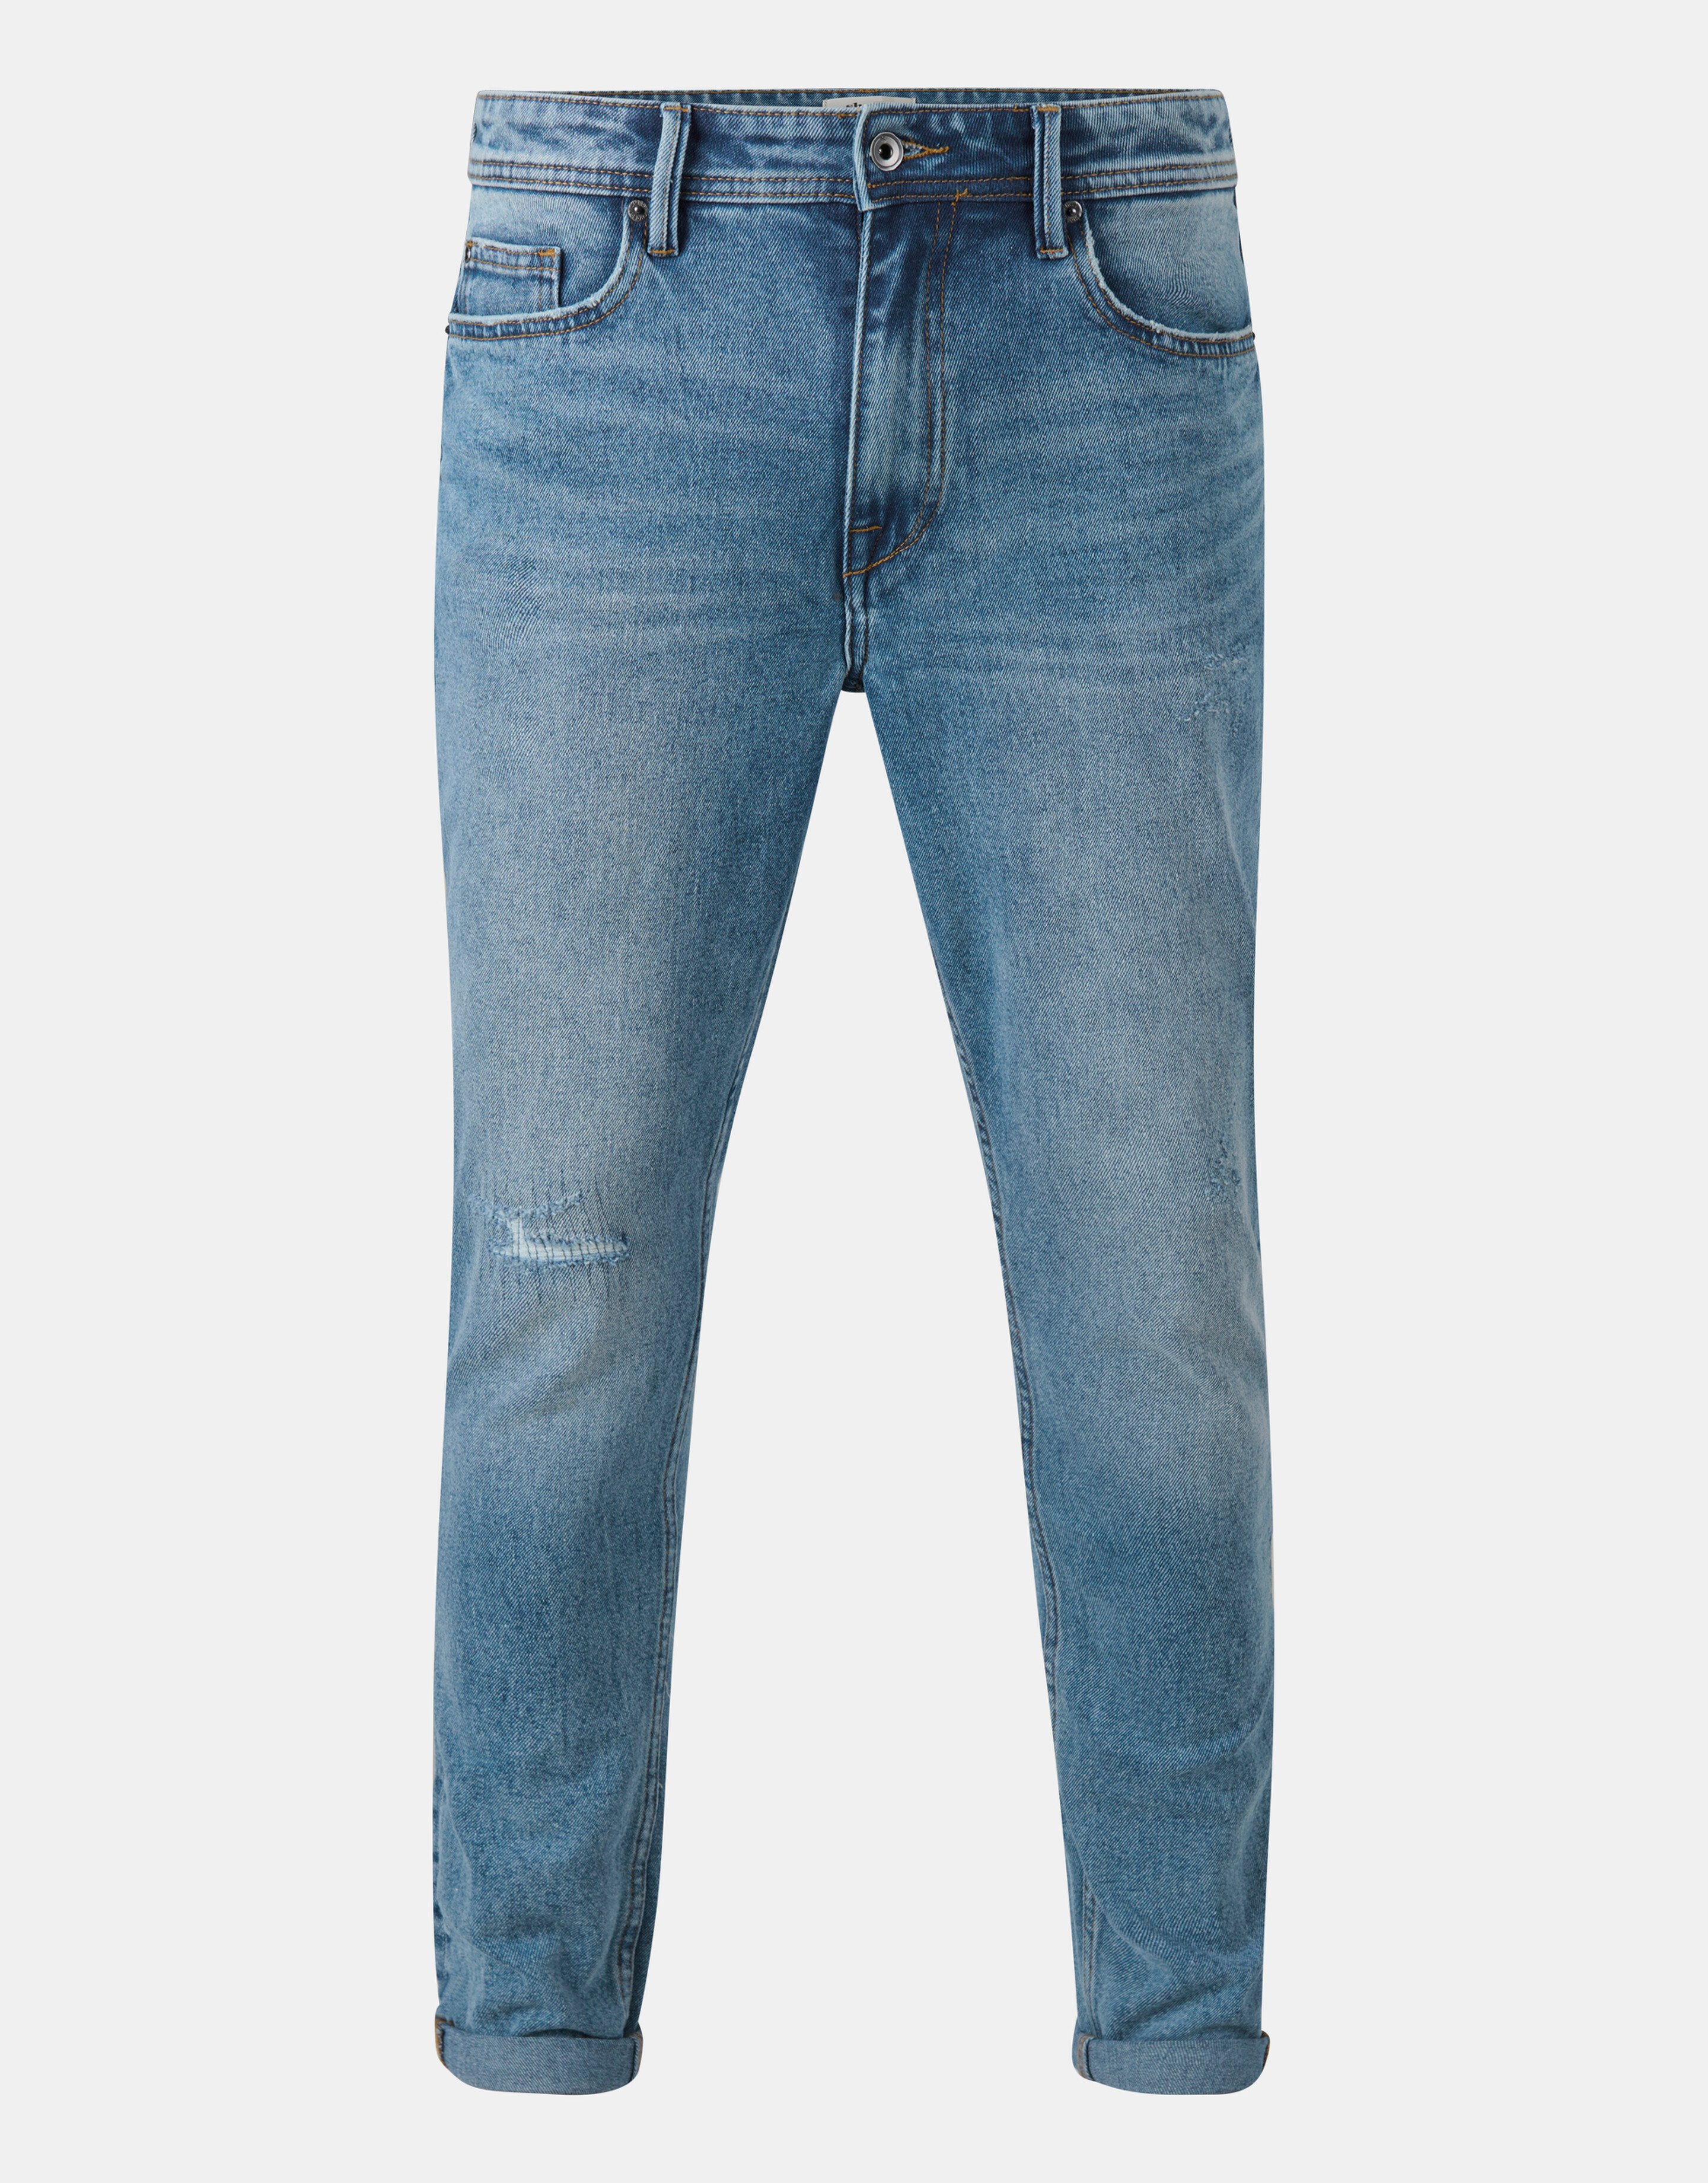 Repaired Tapered Jeans Mediumstone L32 SHOEBY MEN